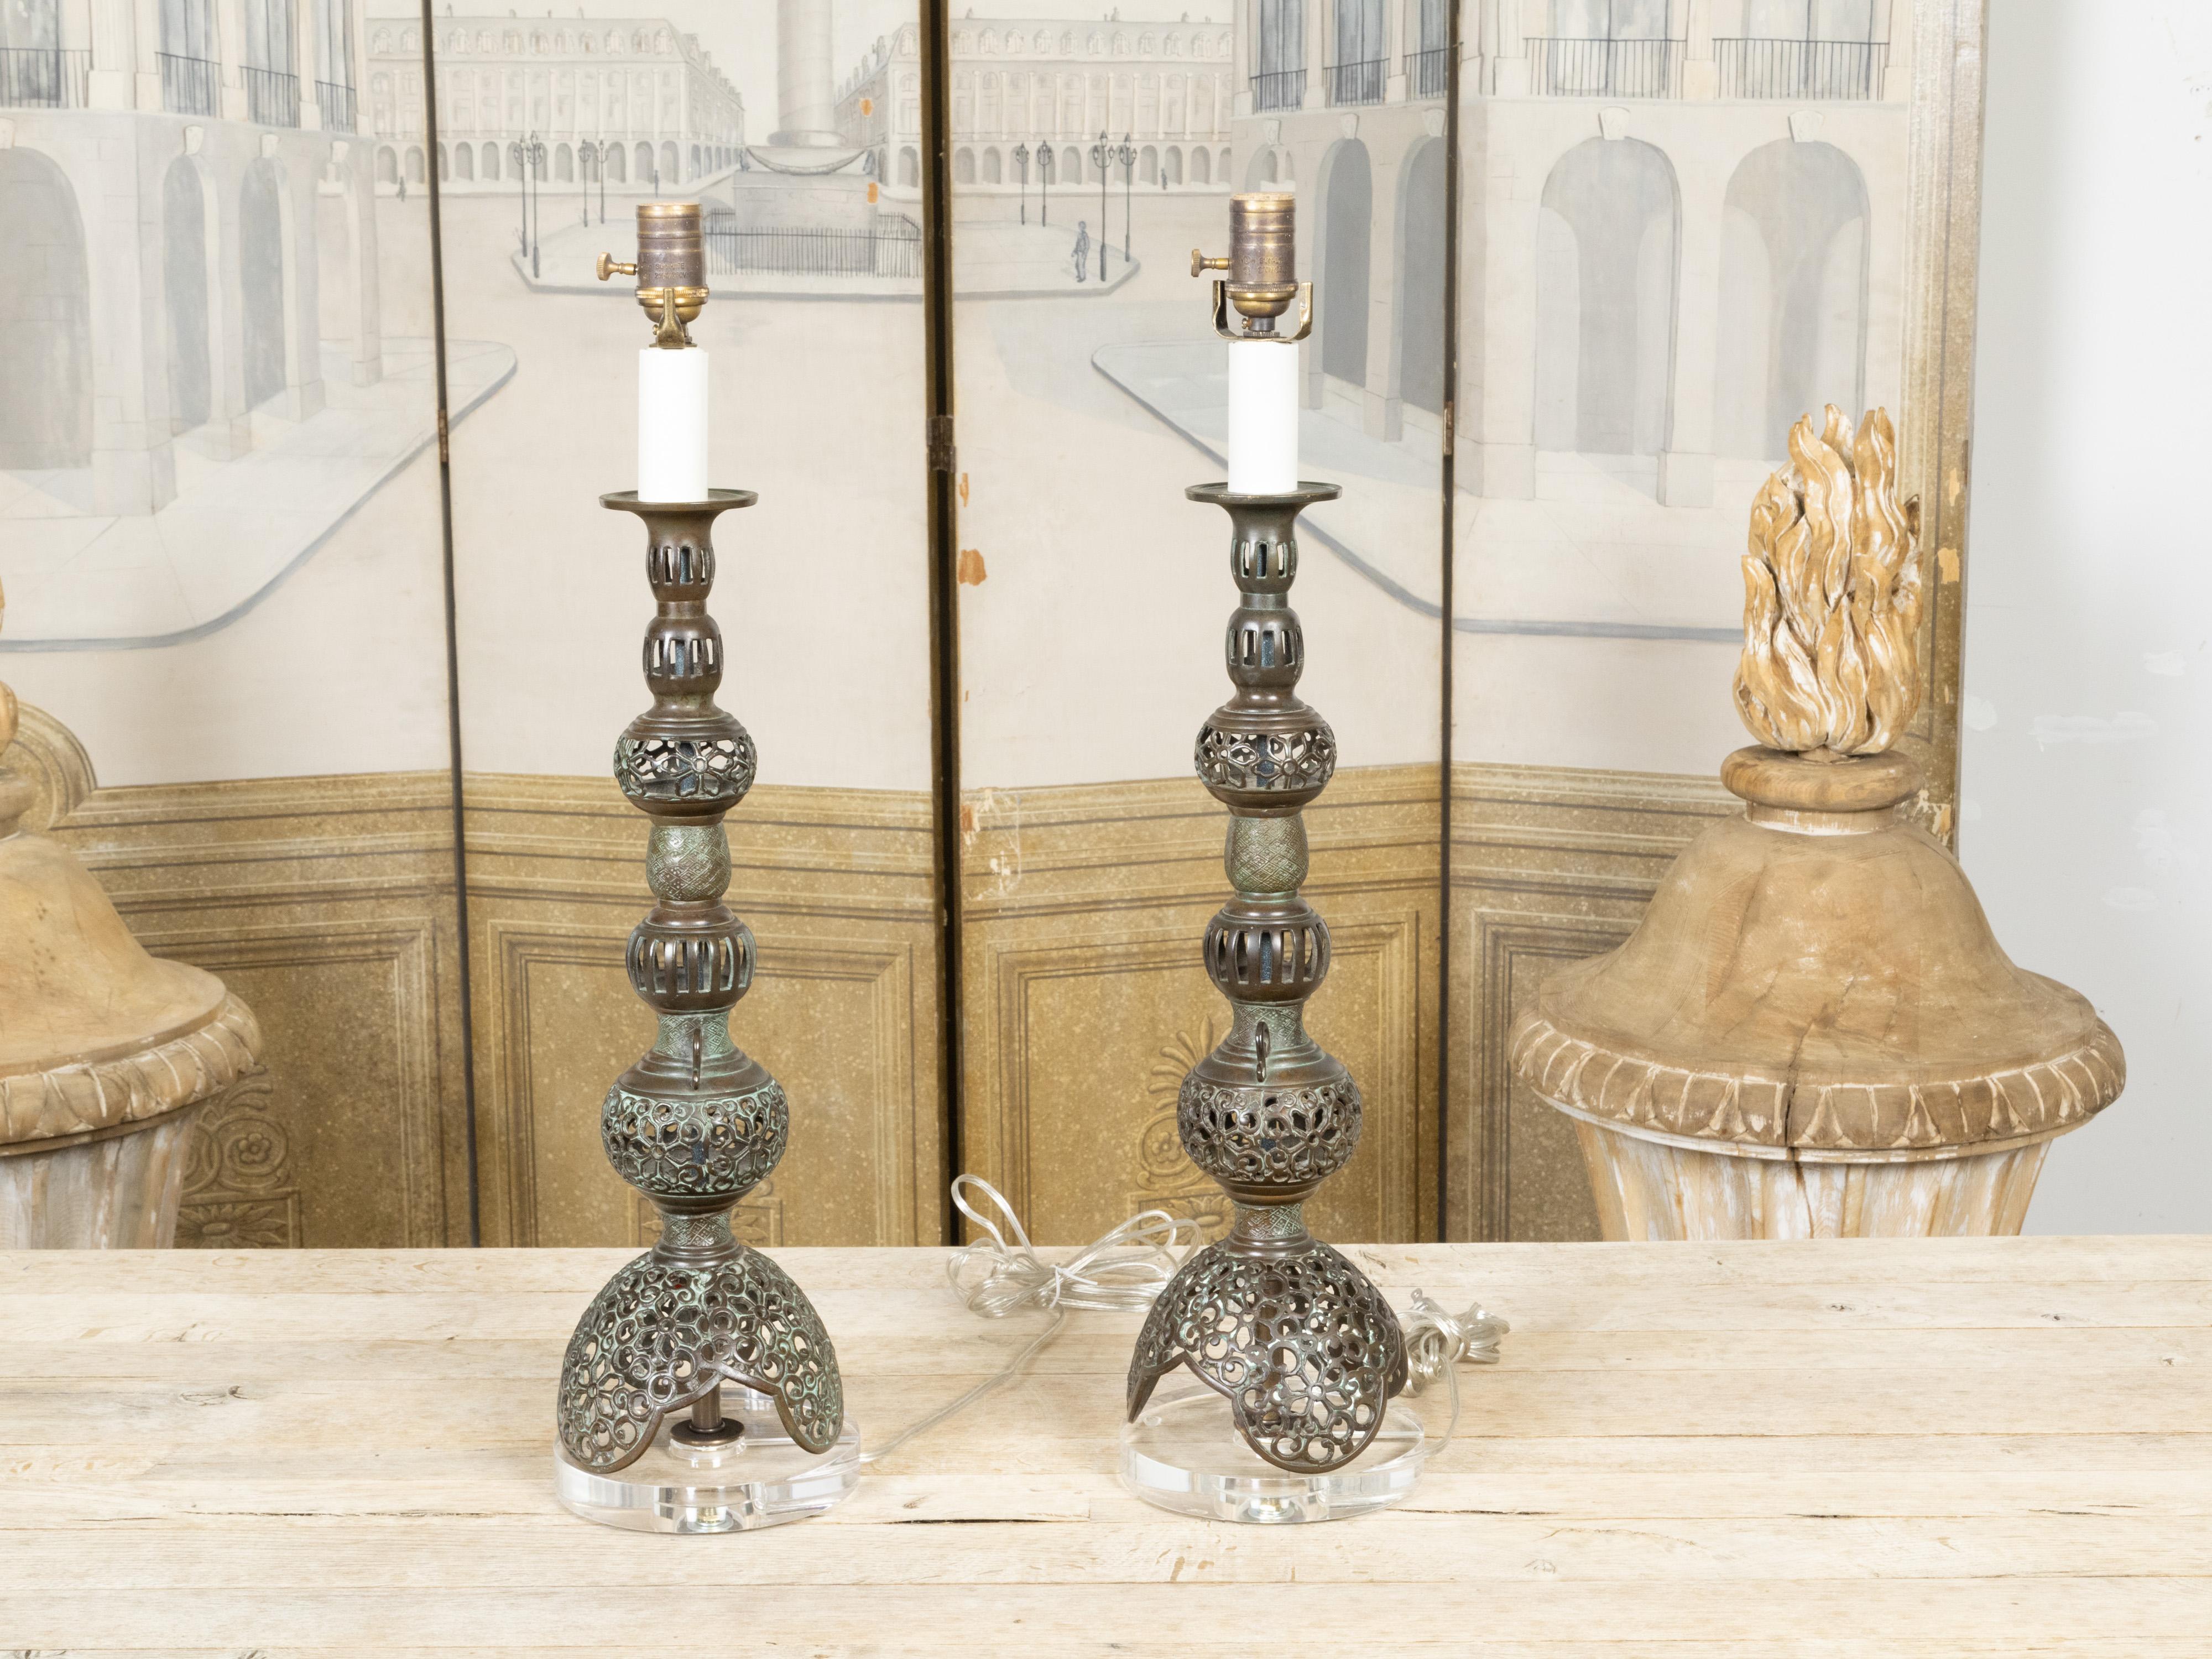 20th Century Pair of Asian Mid-Century Bronze Table Lamps with Openwork Decor and LuciteBases For Sale